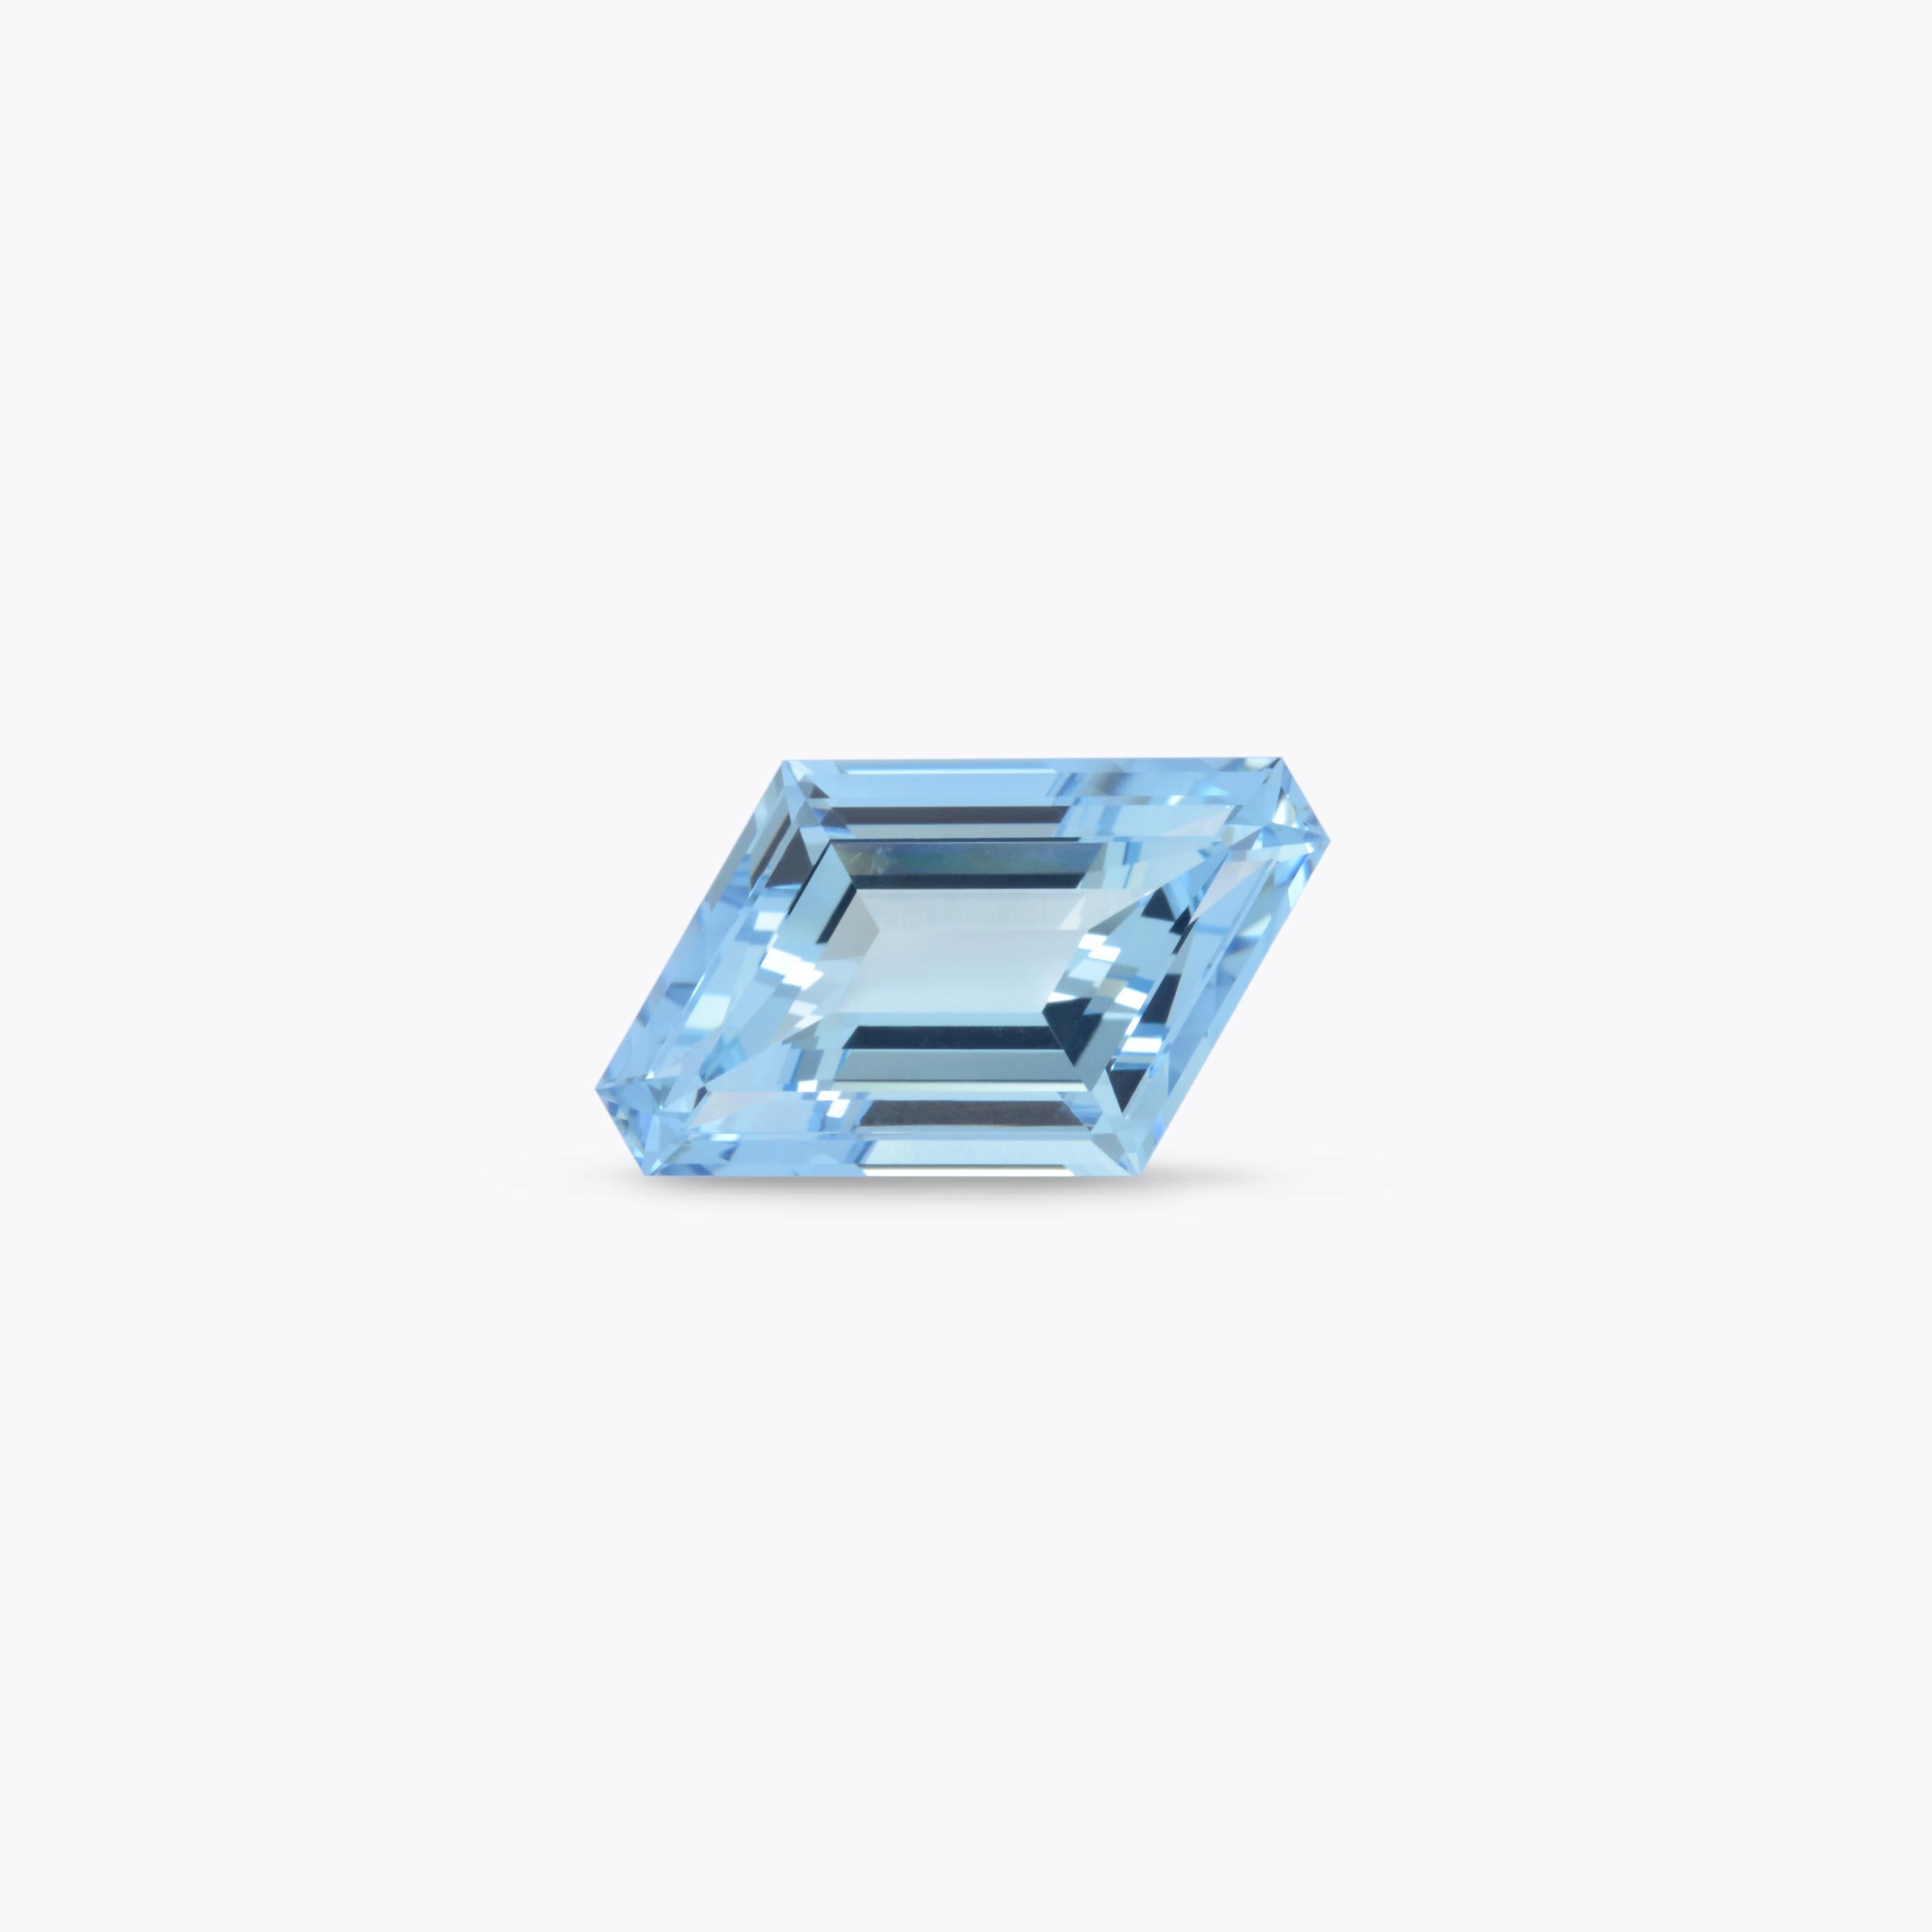 Unique 9.73 carat Aquamarine Parallelogram unmounted gem, offered loose to a gemstone lover.
Dimensions: 20.60 x 14.70 x 7.00 mm
Returns are accepted and paid by us within 7 days of delivery.
We offer supreme custom jewelry work upon request. Please